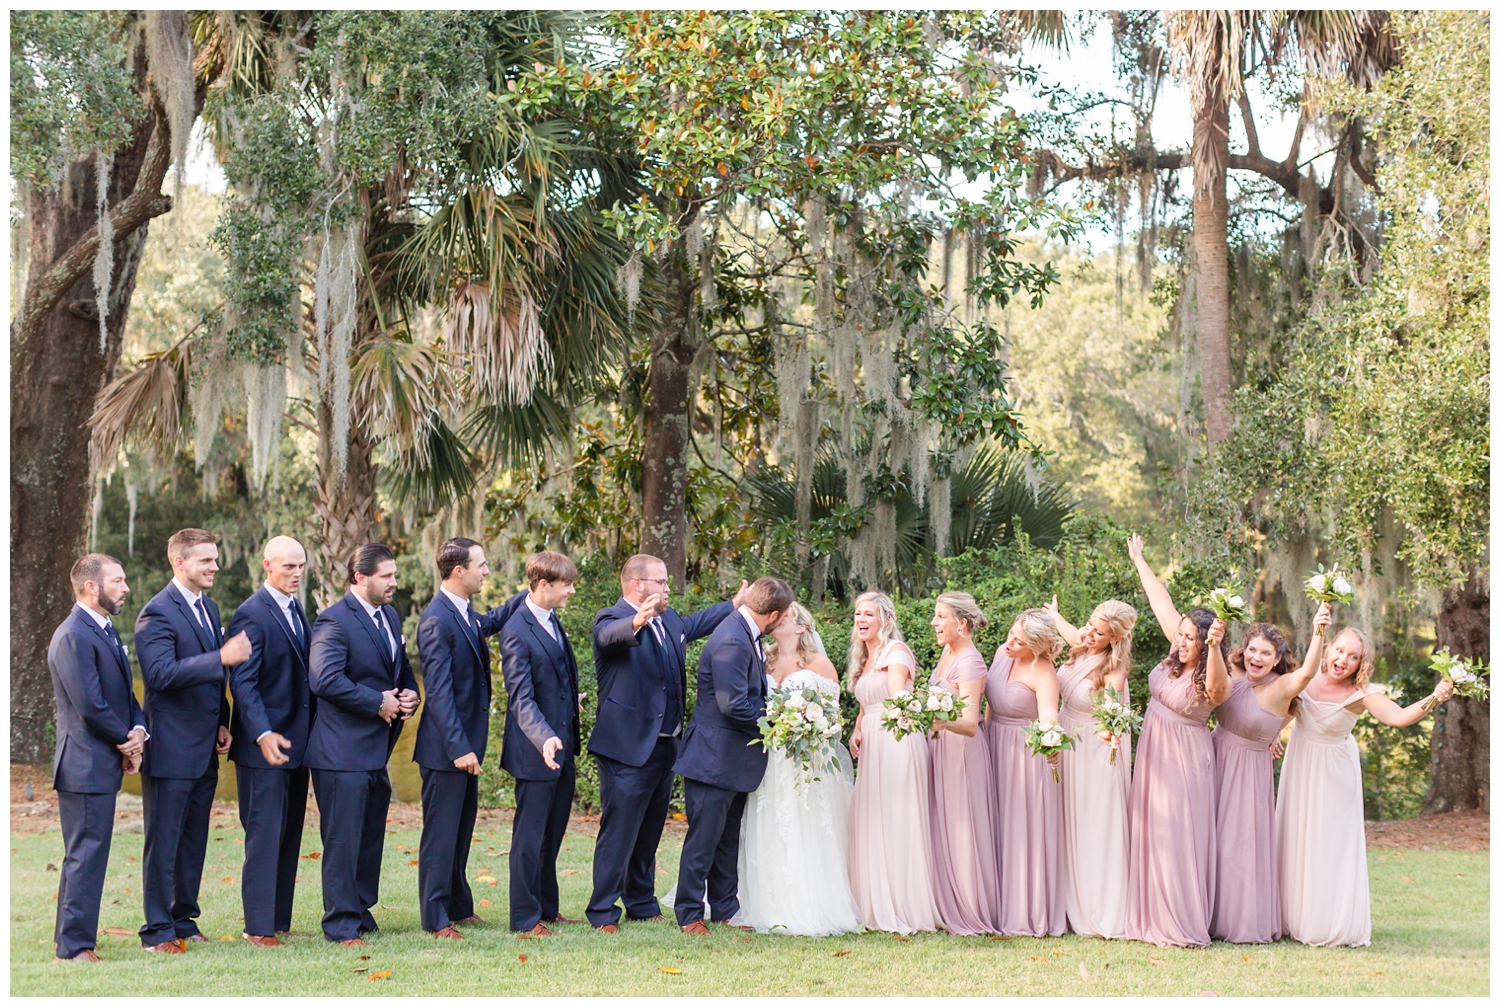 Legare Waring House bridal party portrait on the lawn